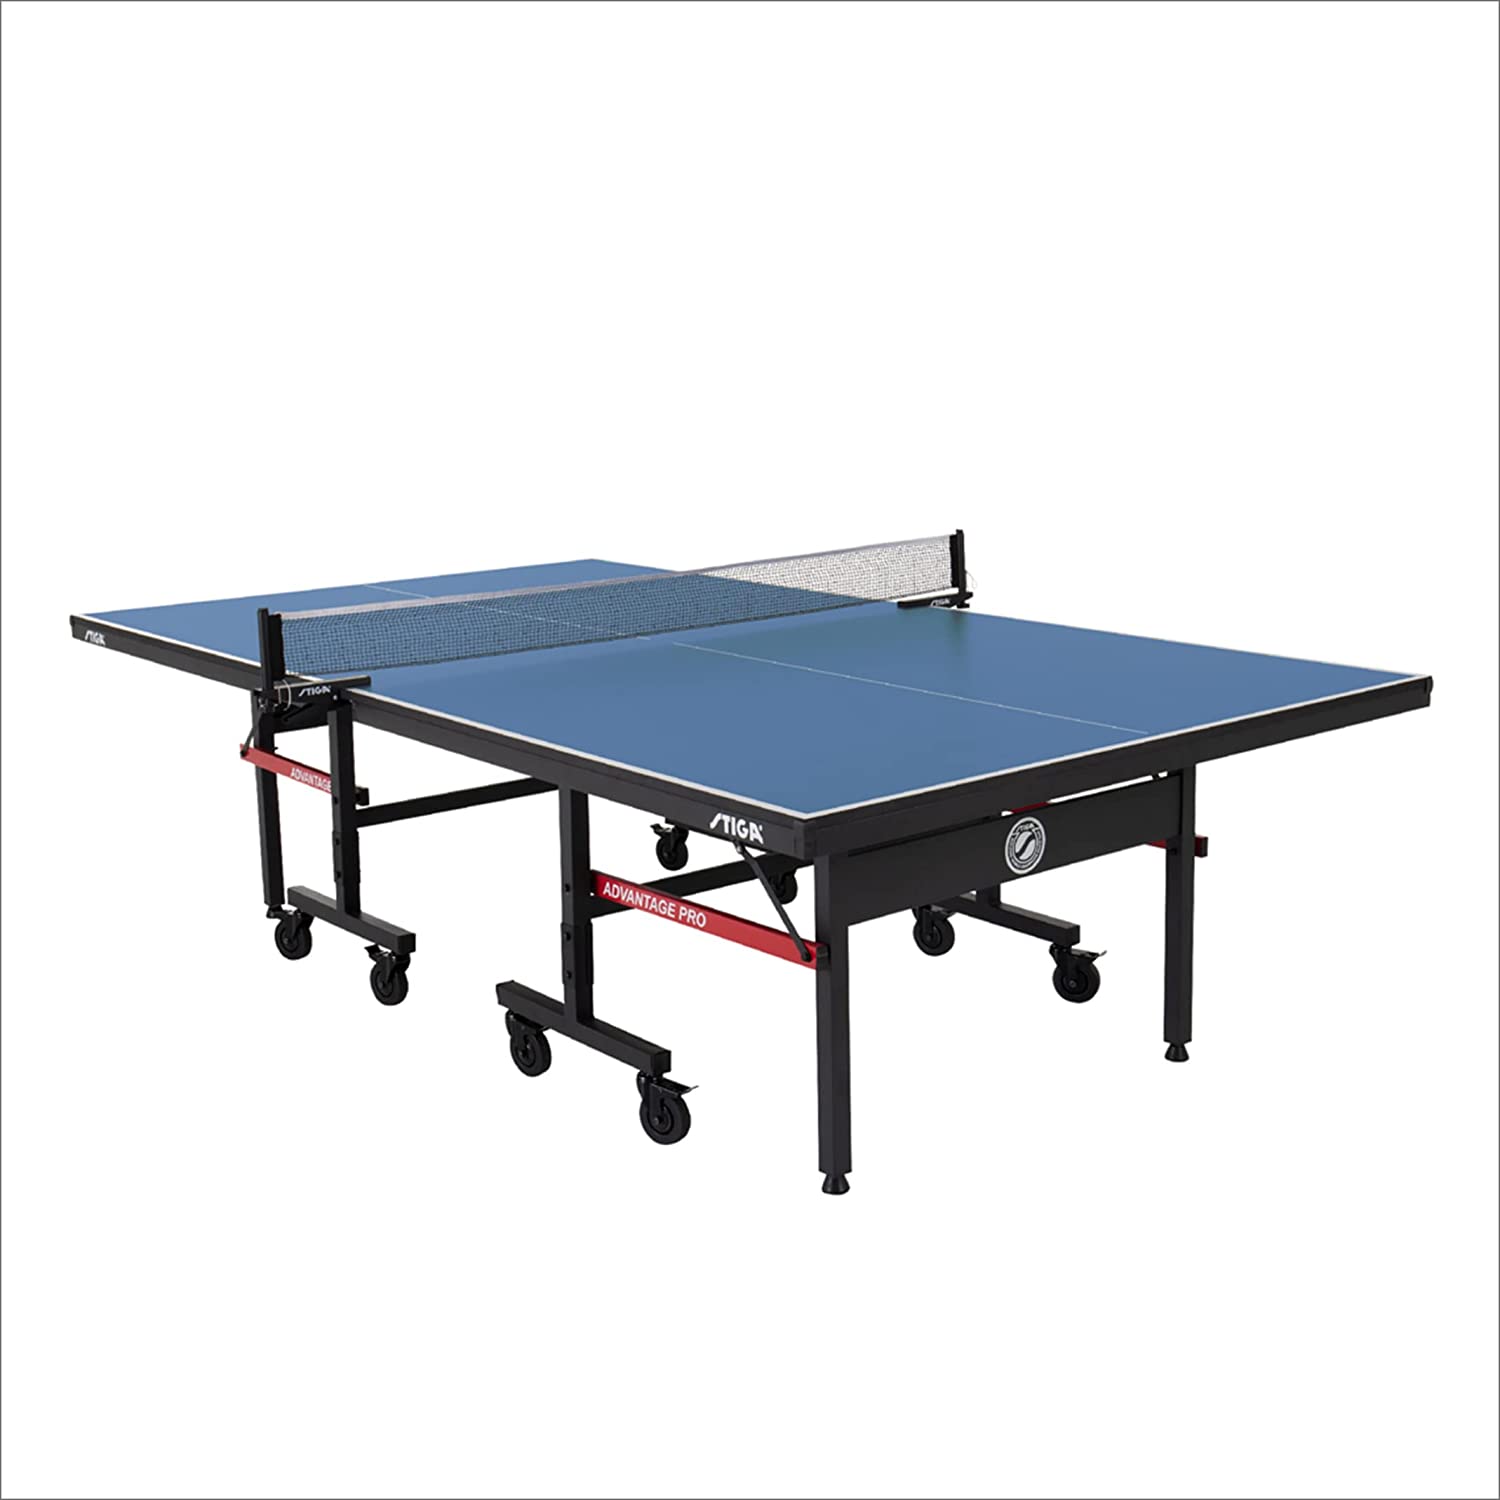 DREAM table at affordable $$.Unique outdoor ping pong table tennis,local pick up 